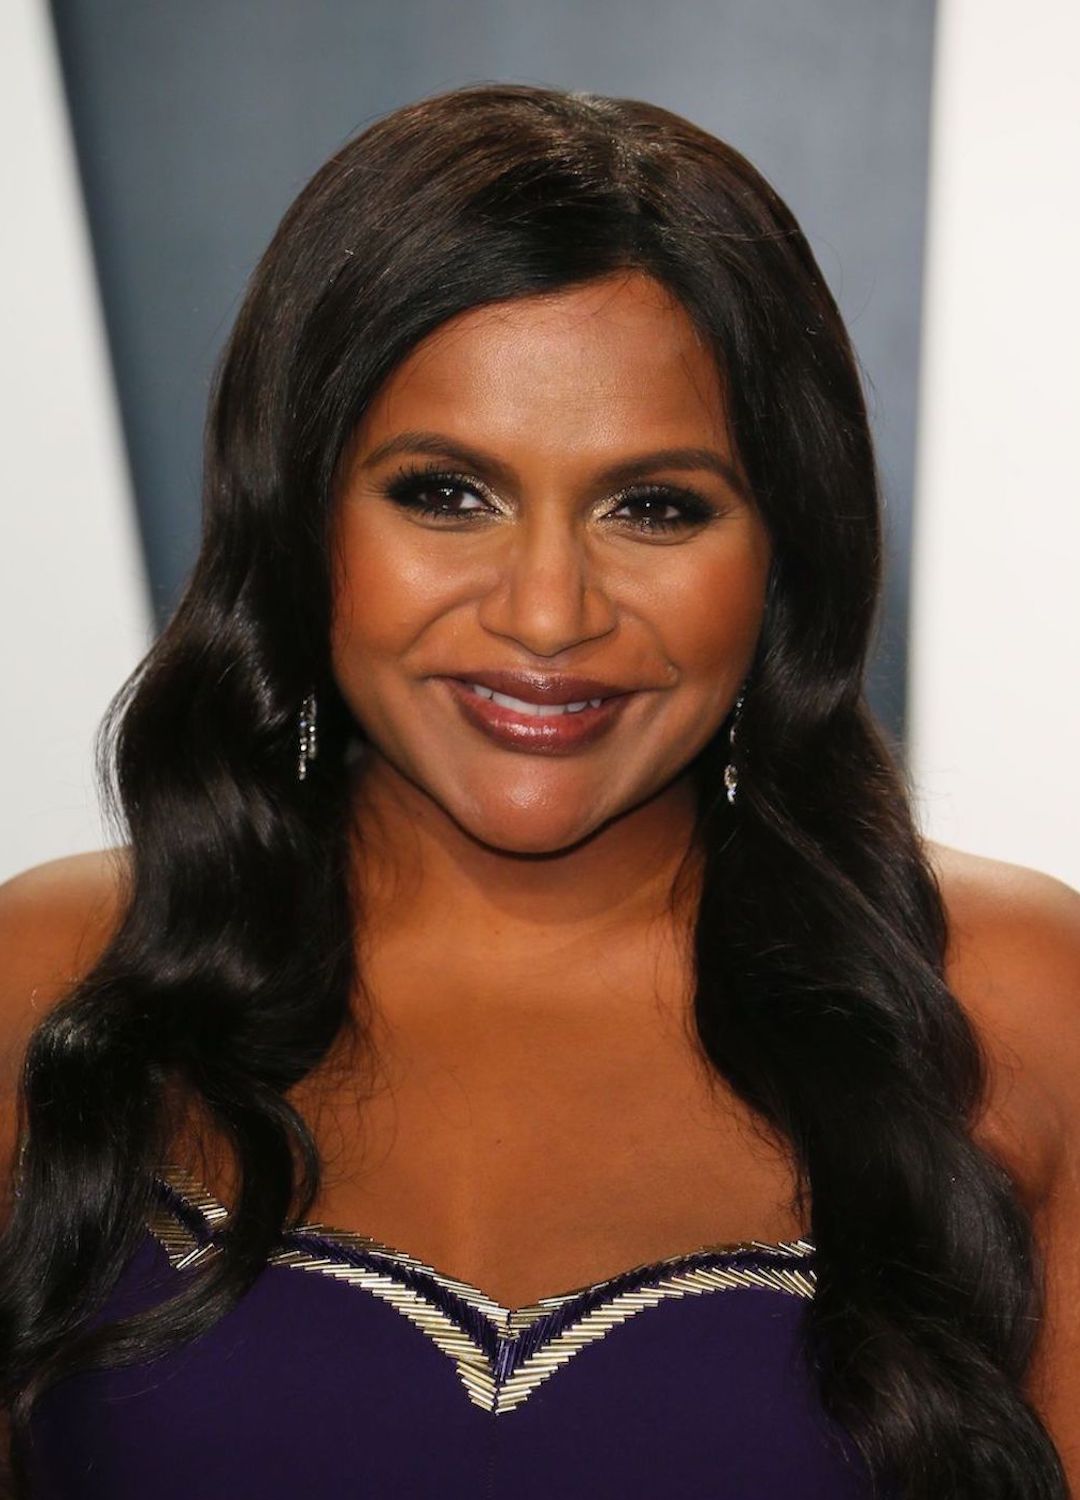 Mindy Kaling attends the 2020 Vanity Fair Oscar Party at The Wallis Annenberg Center for the Performing Arts in Beverly Hills, Califronia on February 9, 2020